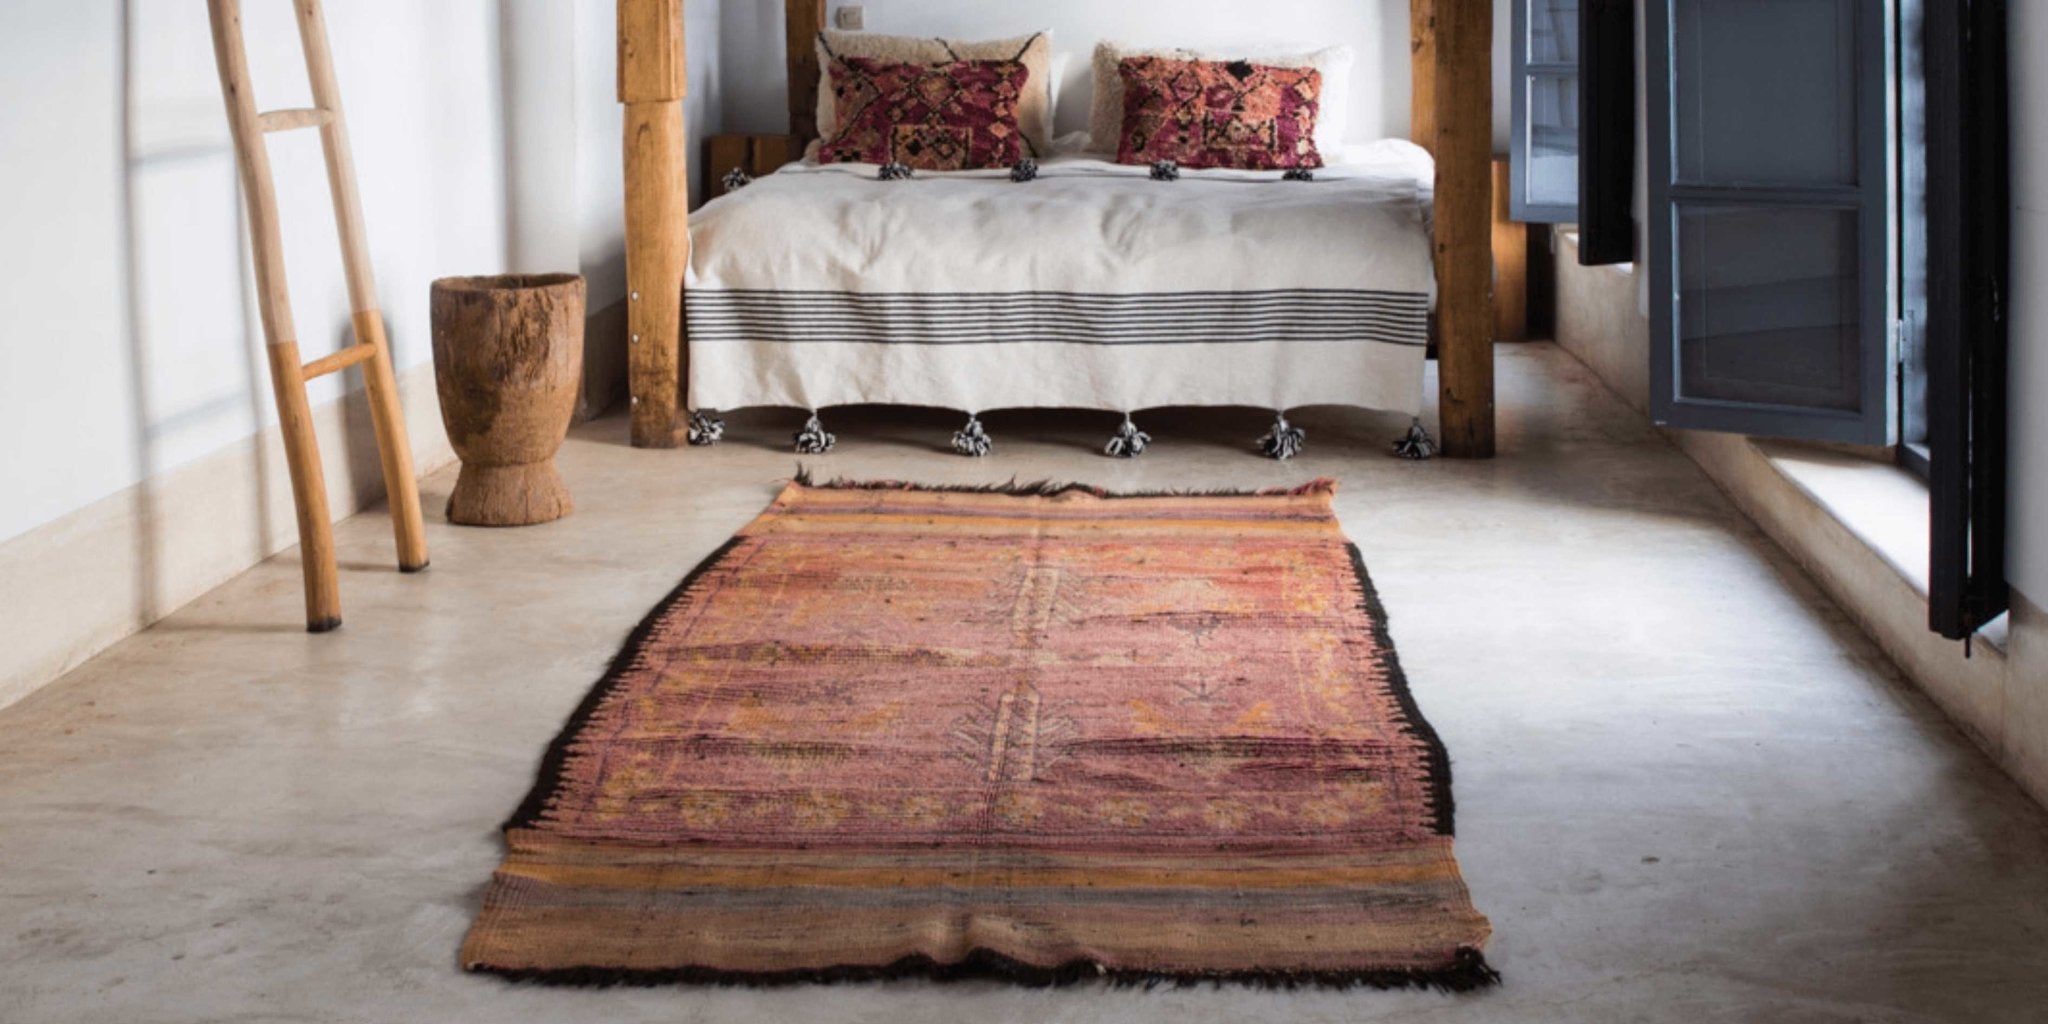 Haouz Rugs - Vintage Moroccan Rugs - Nouvelle Nomad